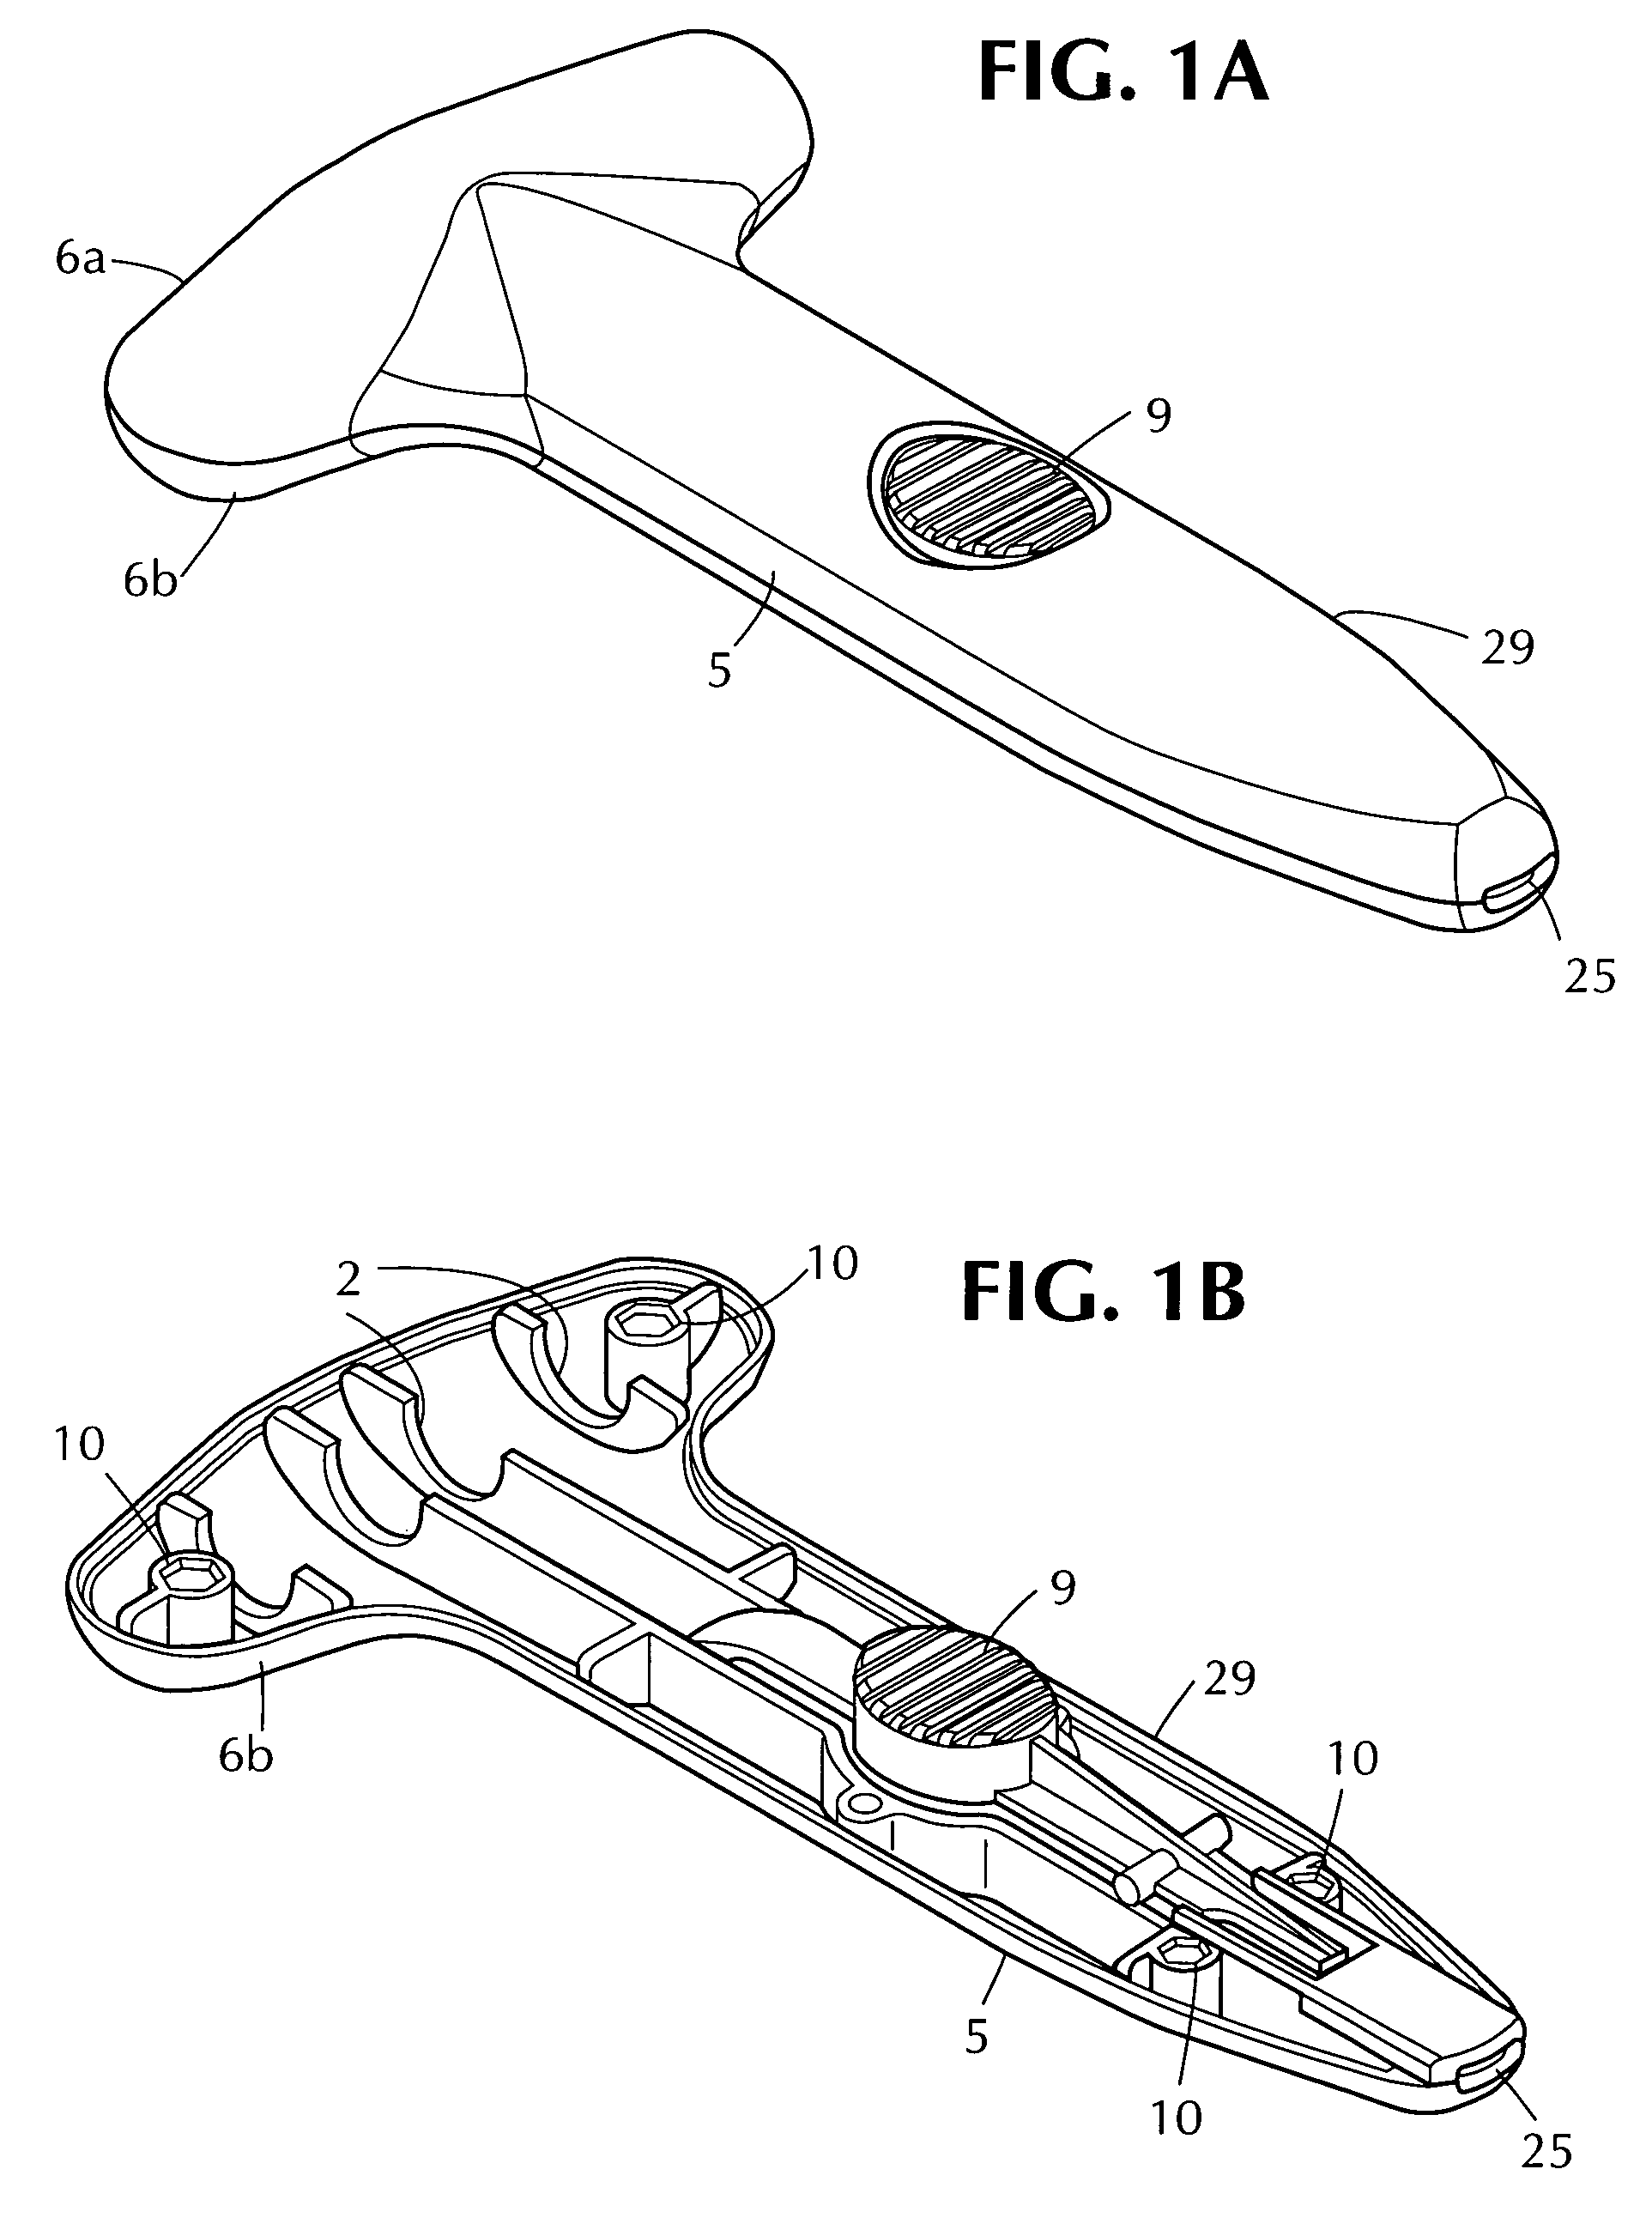 Self-anchoring sling and introducer system